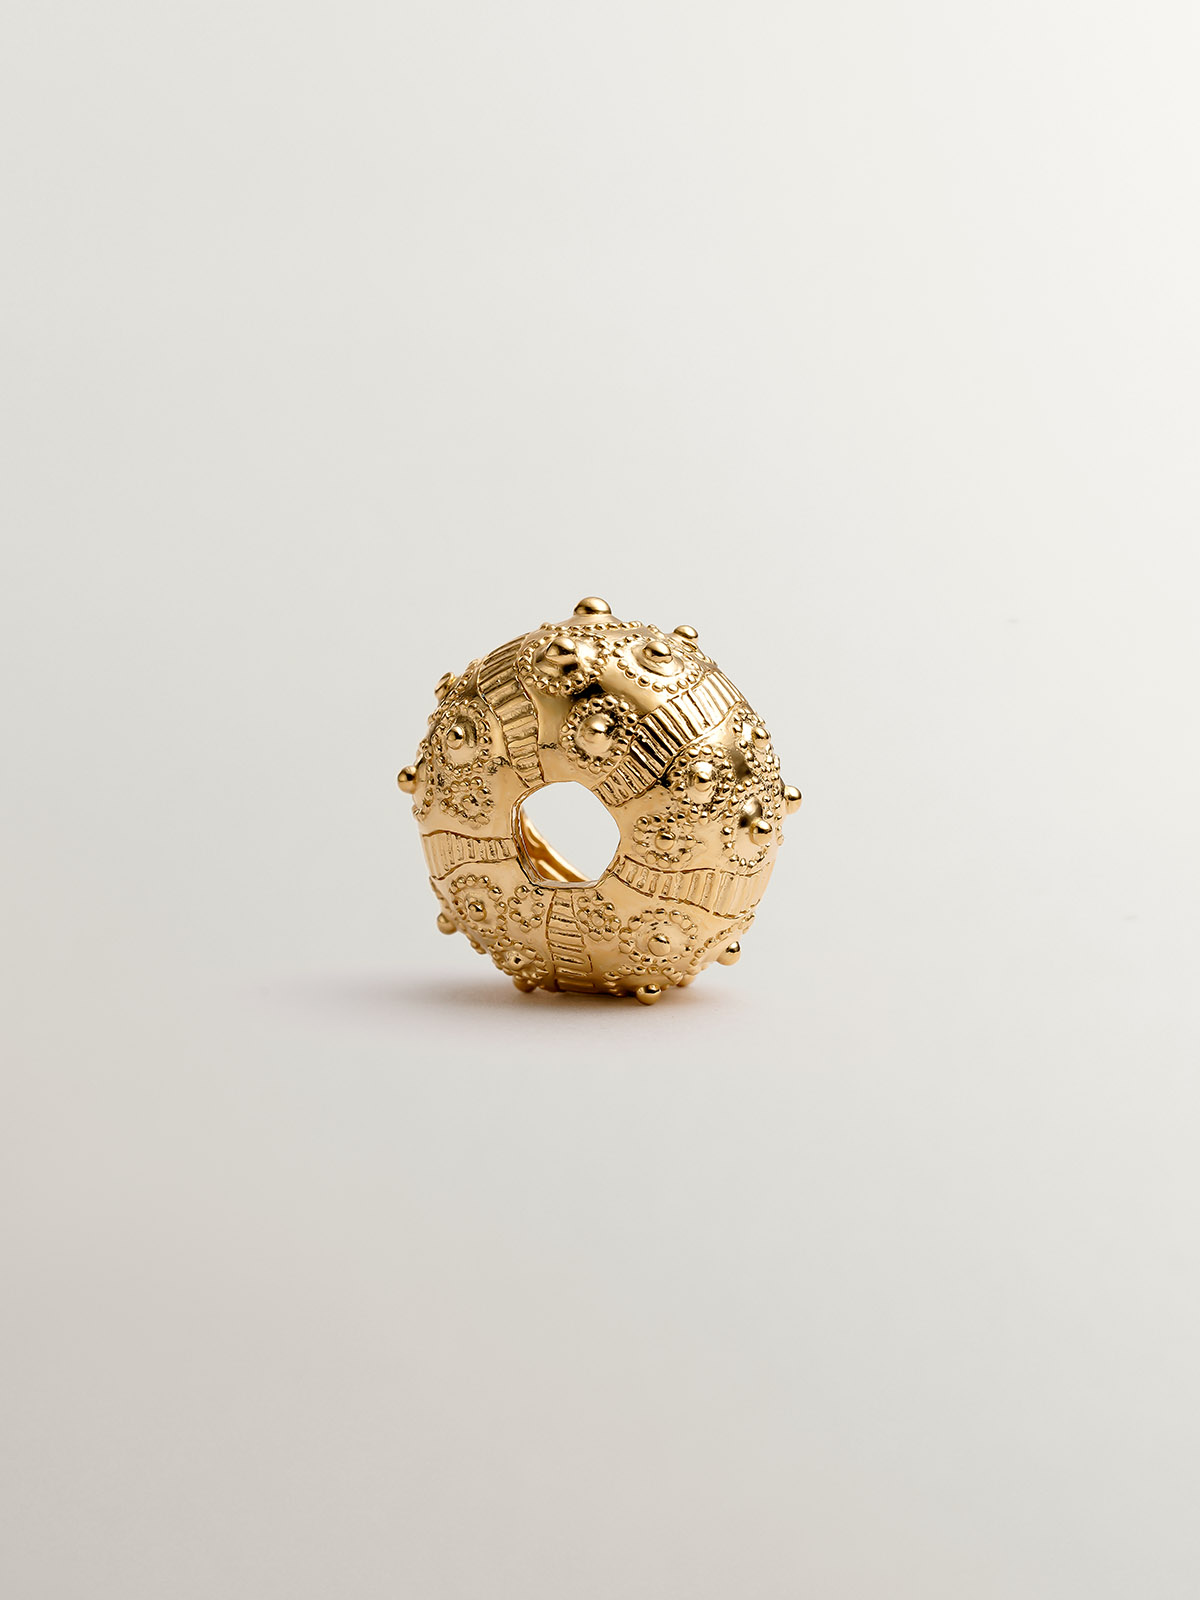 18K yellow gold-plated 925 silver charm in the shape of a sea urchin.